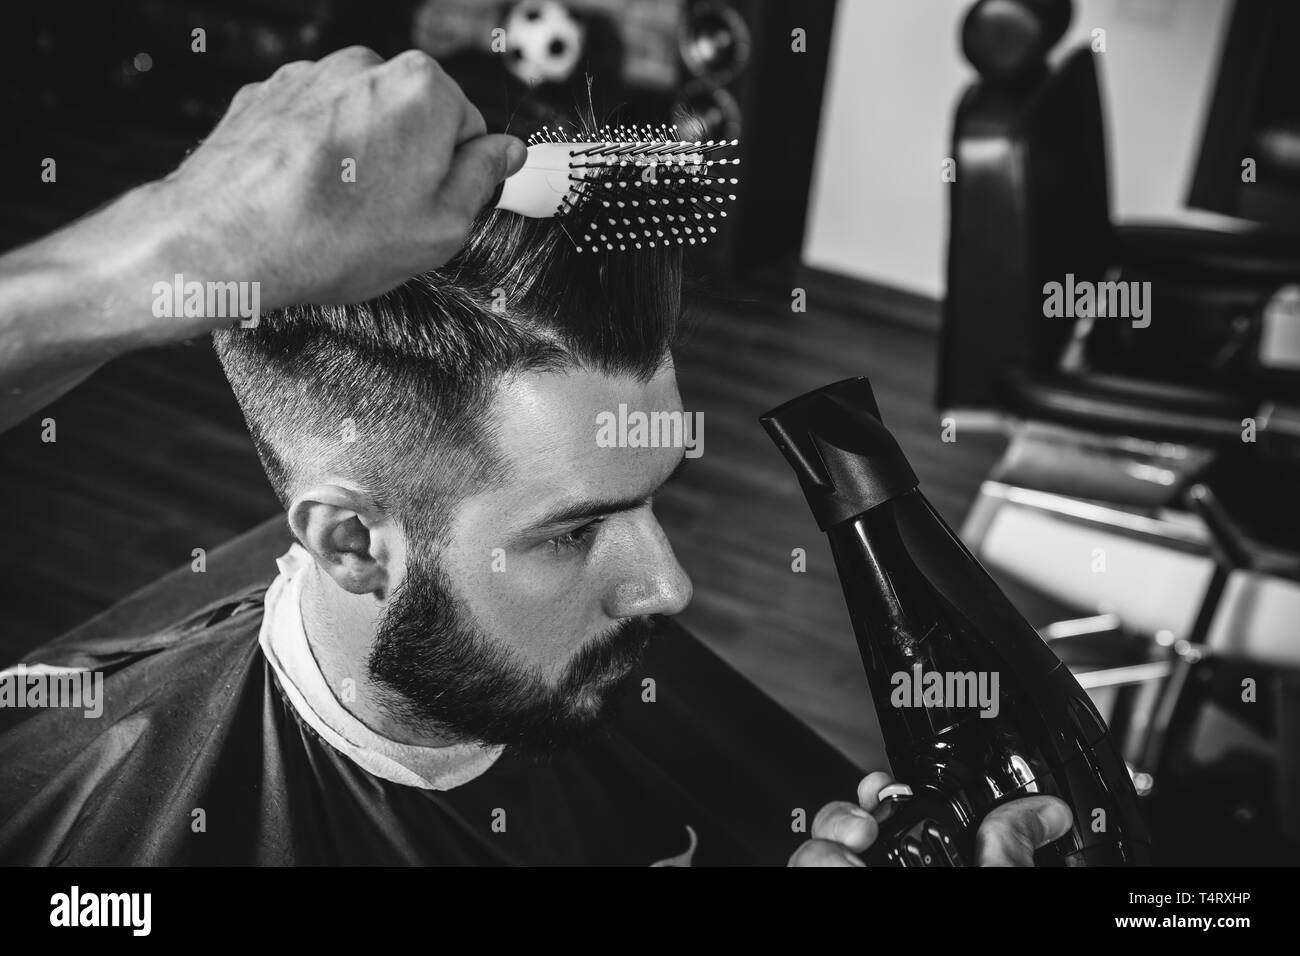 Young handsome barber making haircut for attractive bearded man at barbershop. Black and white or colorless photo. Hairstyle, salon, hairdresser, barber shop, lifestyle concept. Caucasian male models. Stock Photo